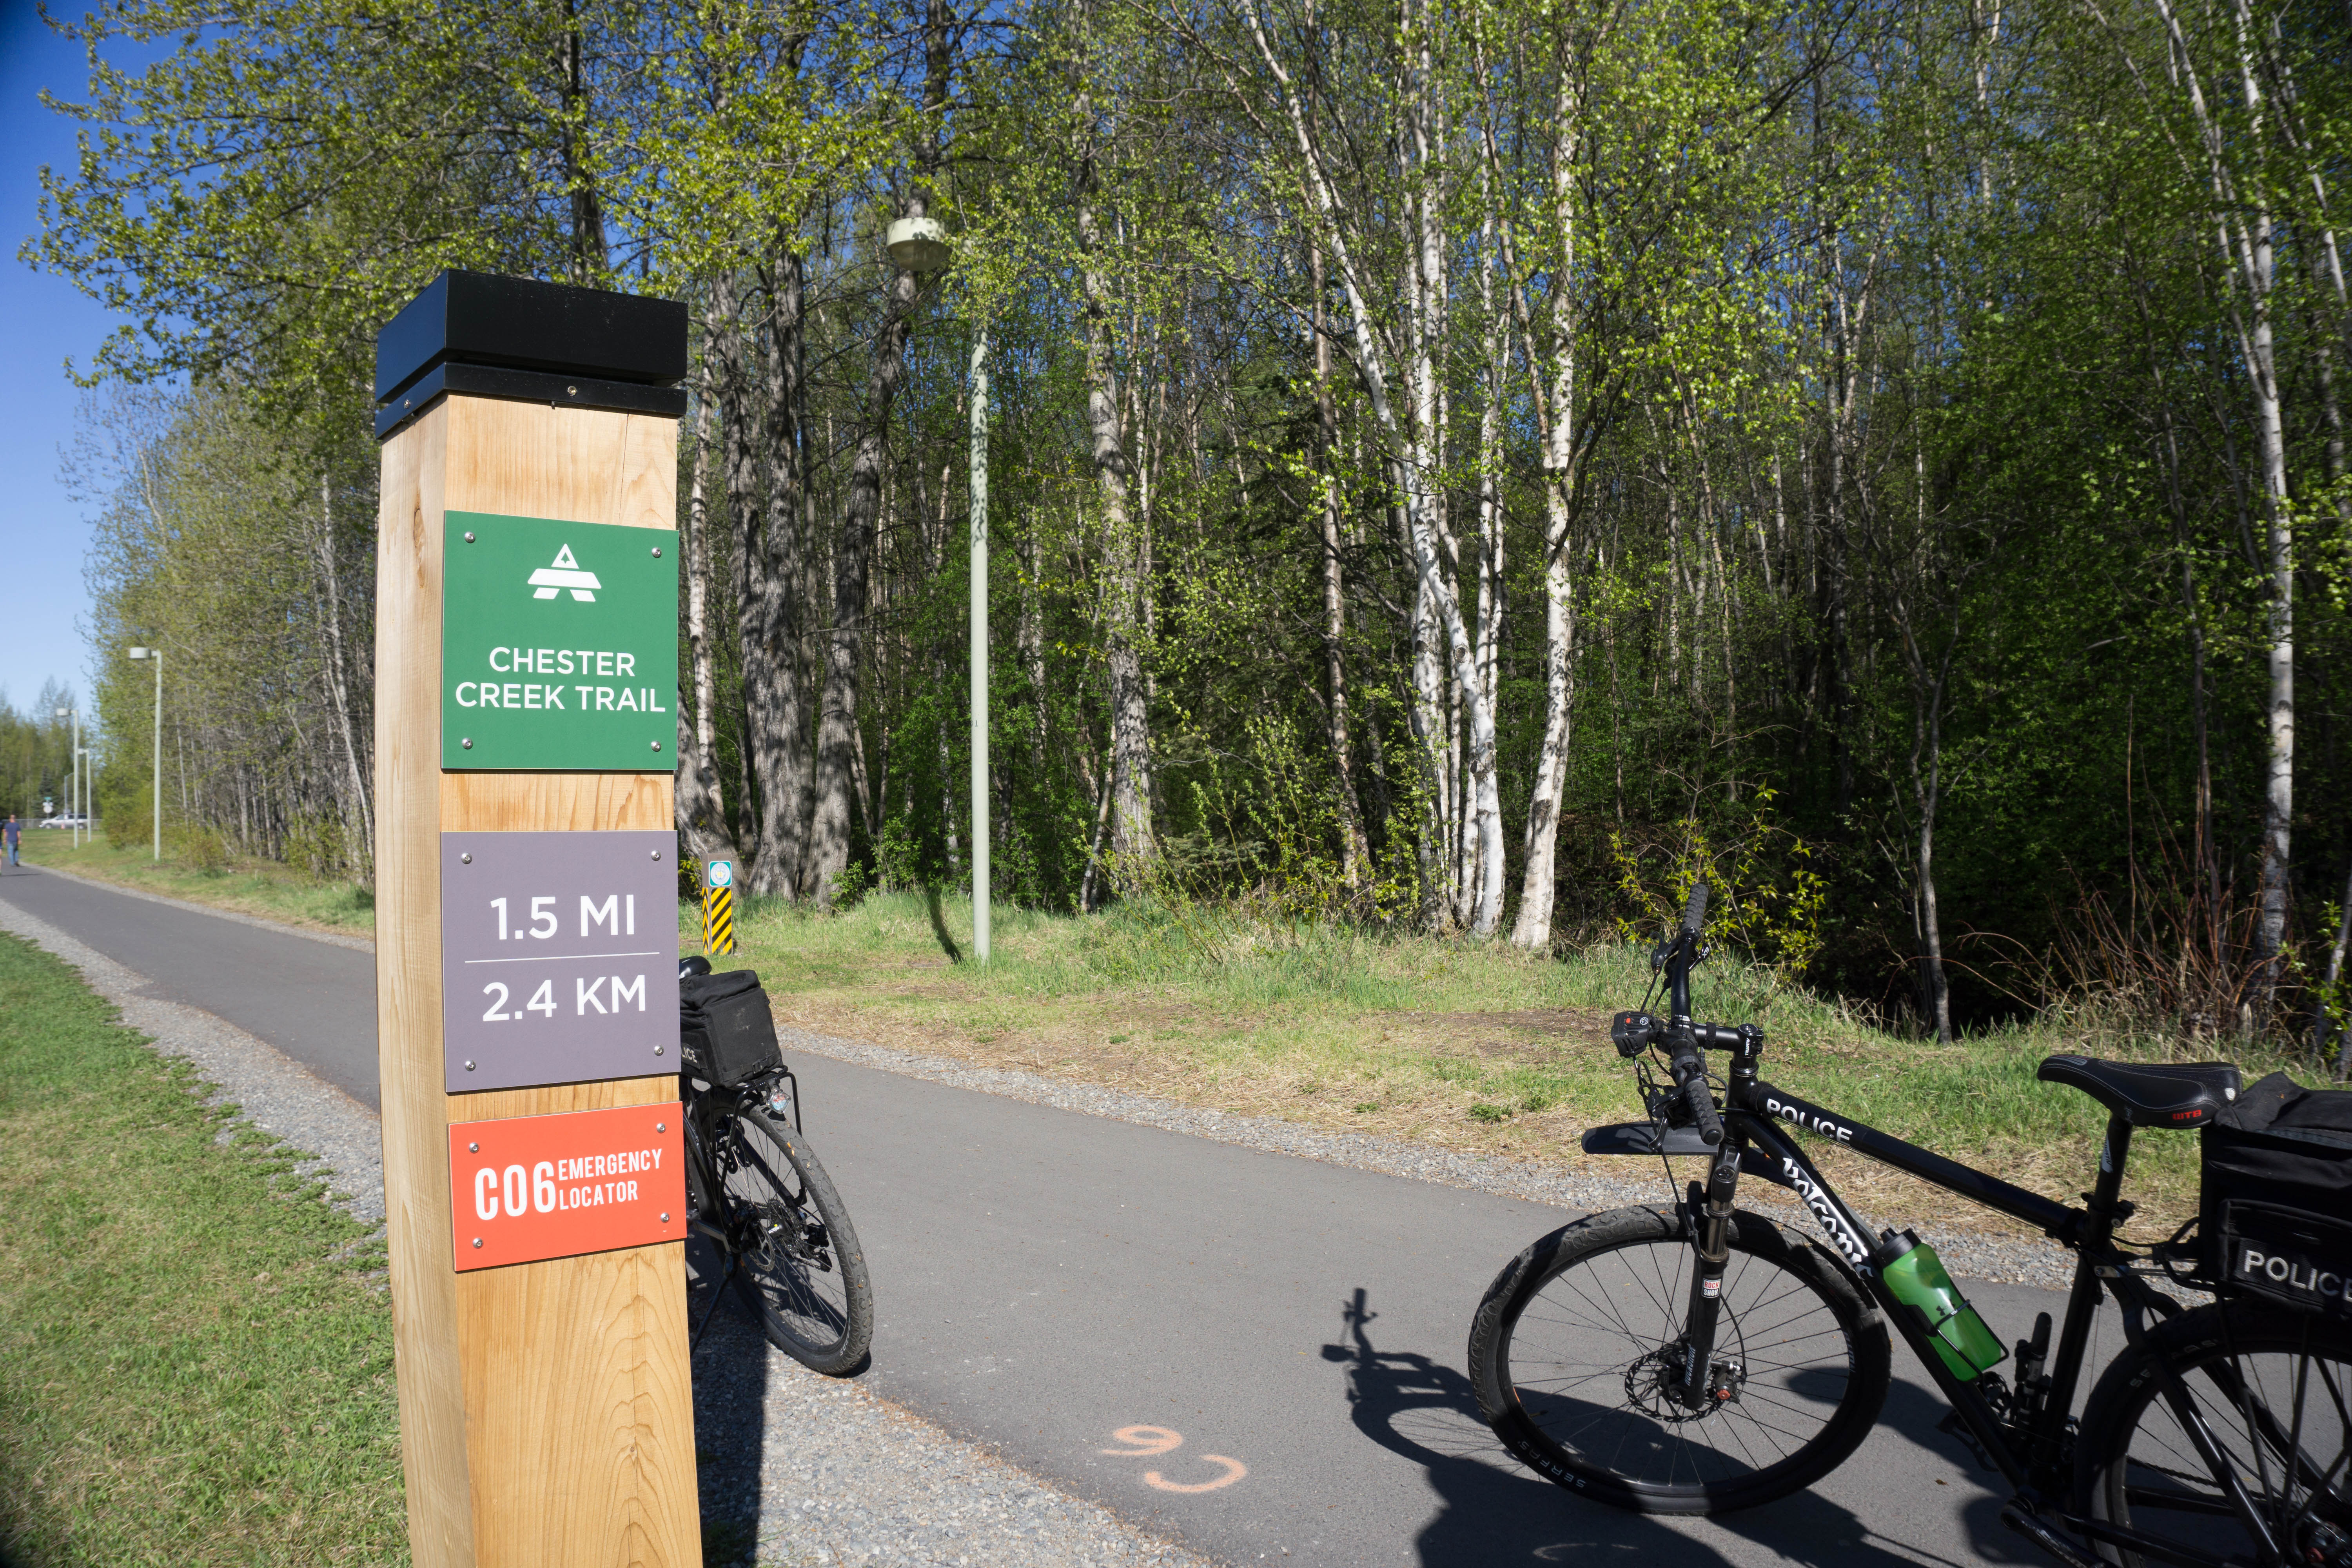 Anchorage Trails & Transit Area of Focus | A Live. Work. Play. initiative to improve our trails and public transportation